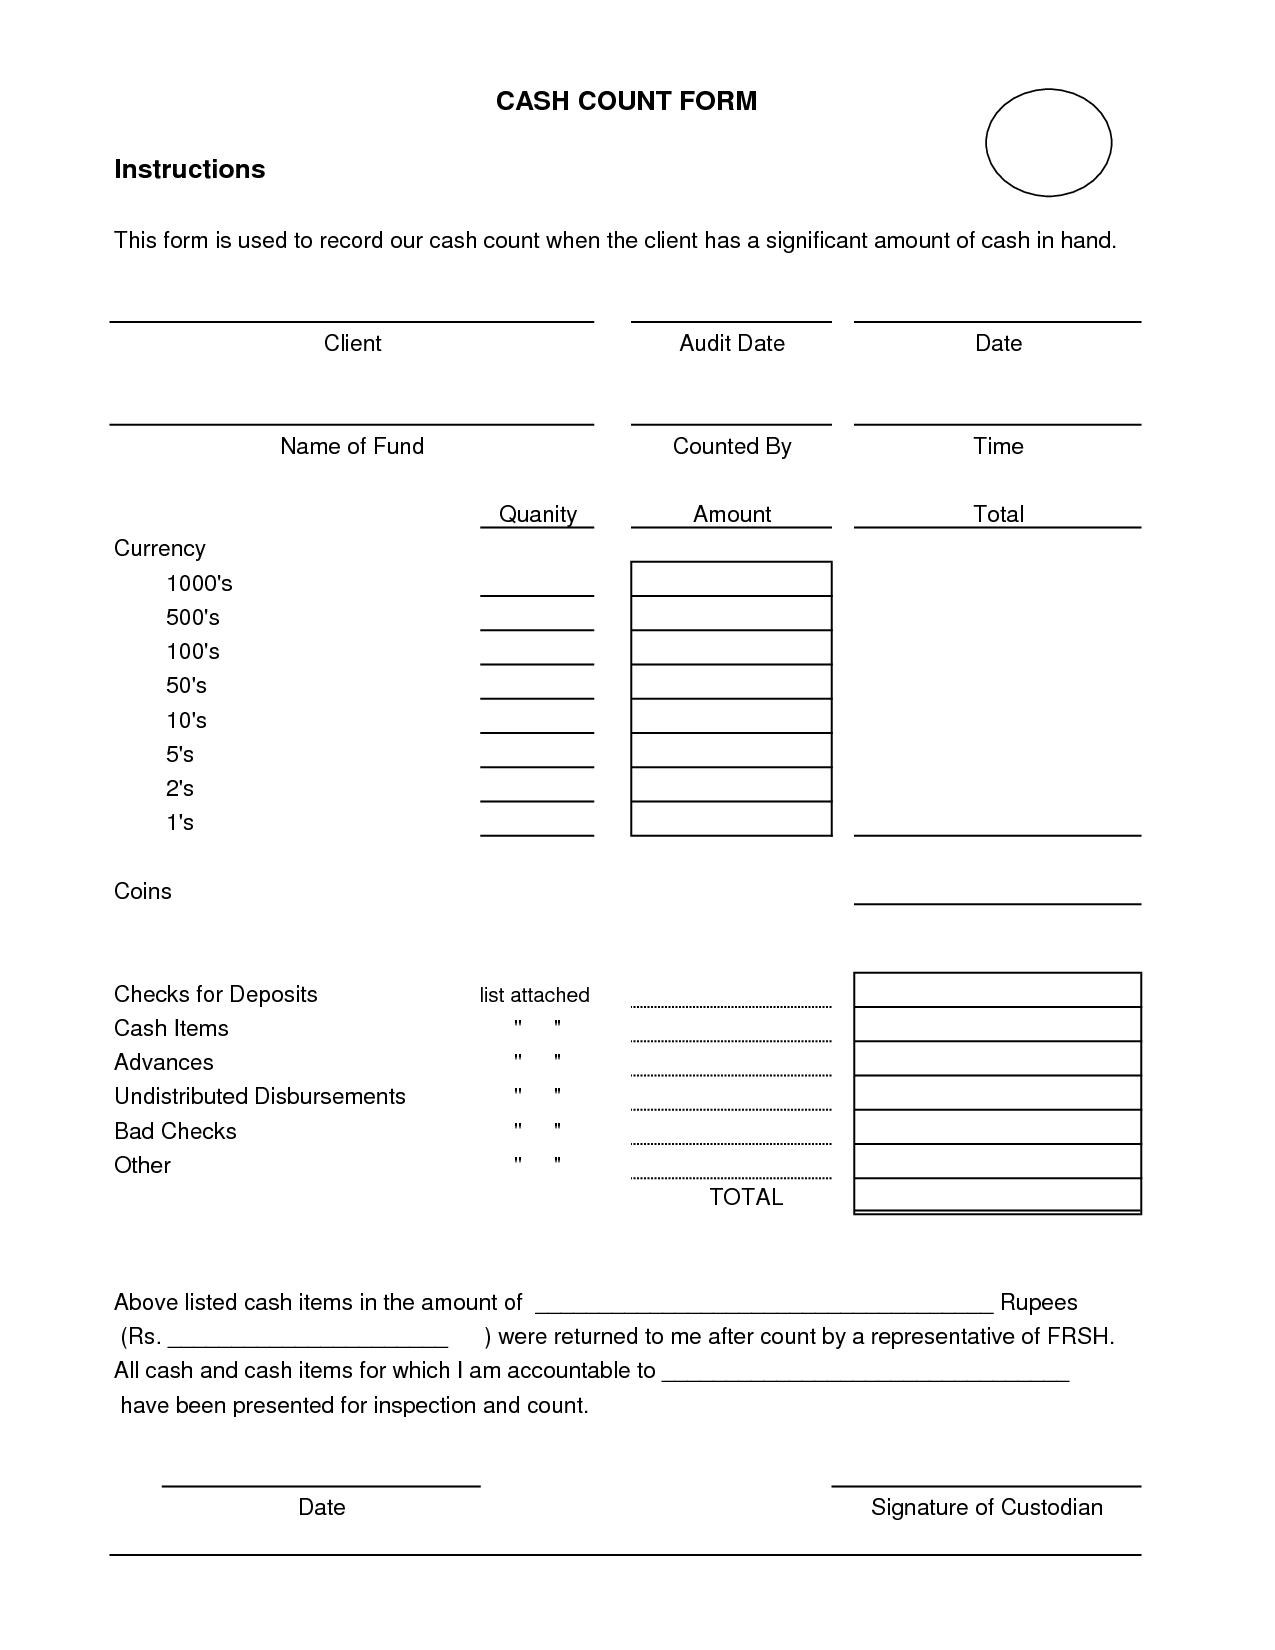 Daily Cash Sheet Template | Cash Count Sheet – Audit Working Intended For End Of Day Cash Register Report Template